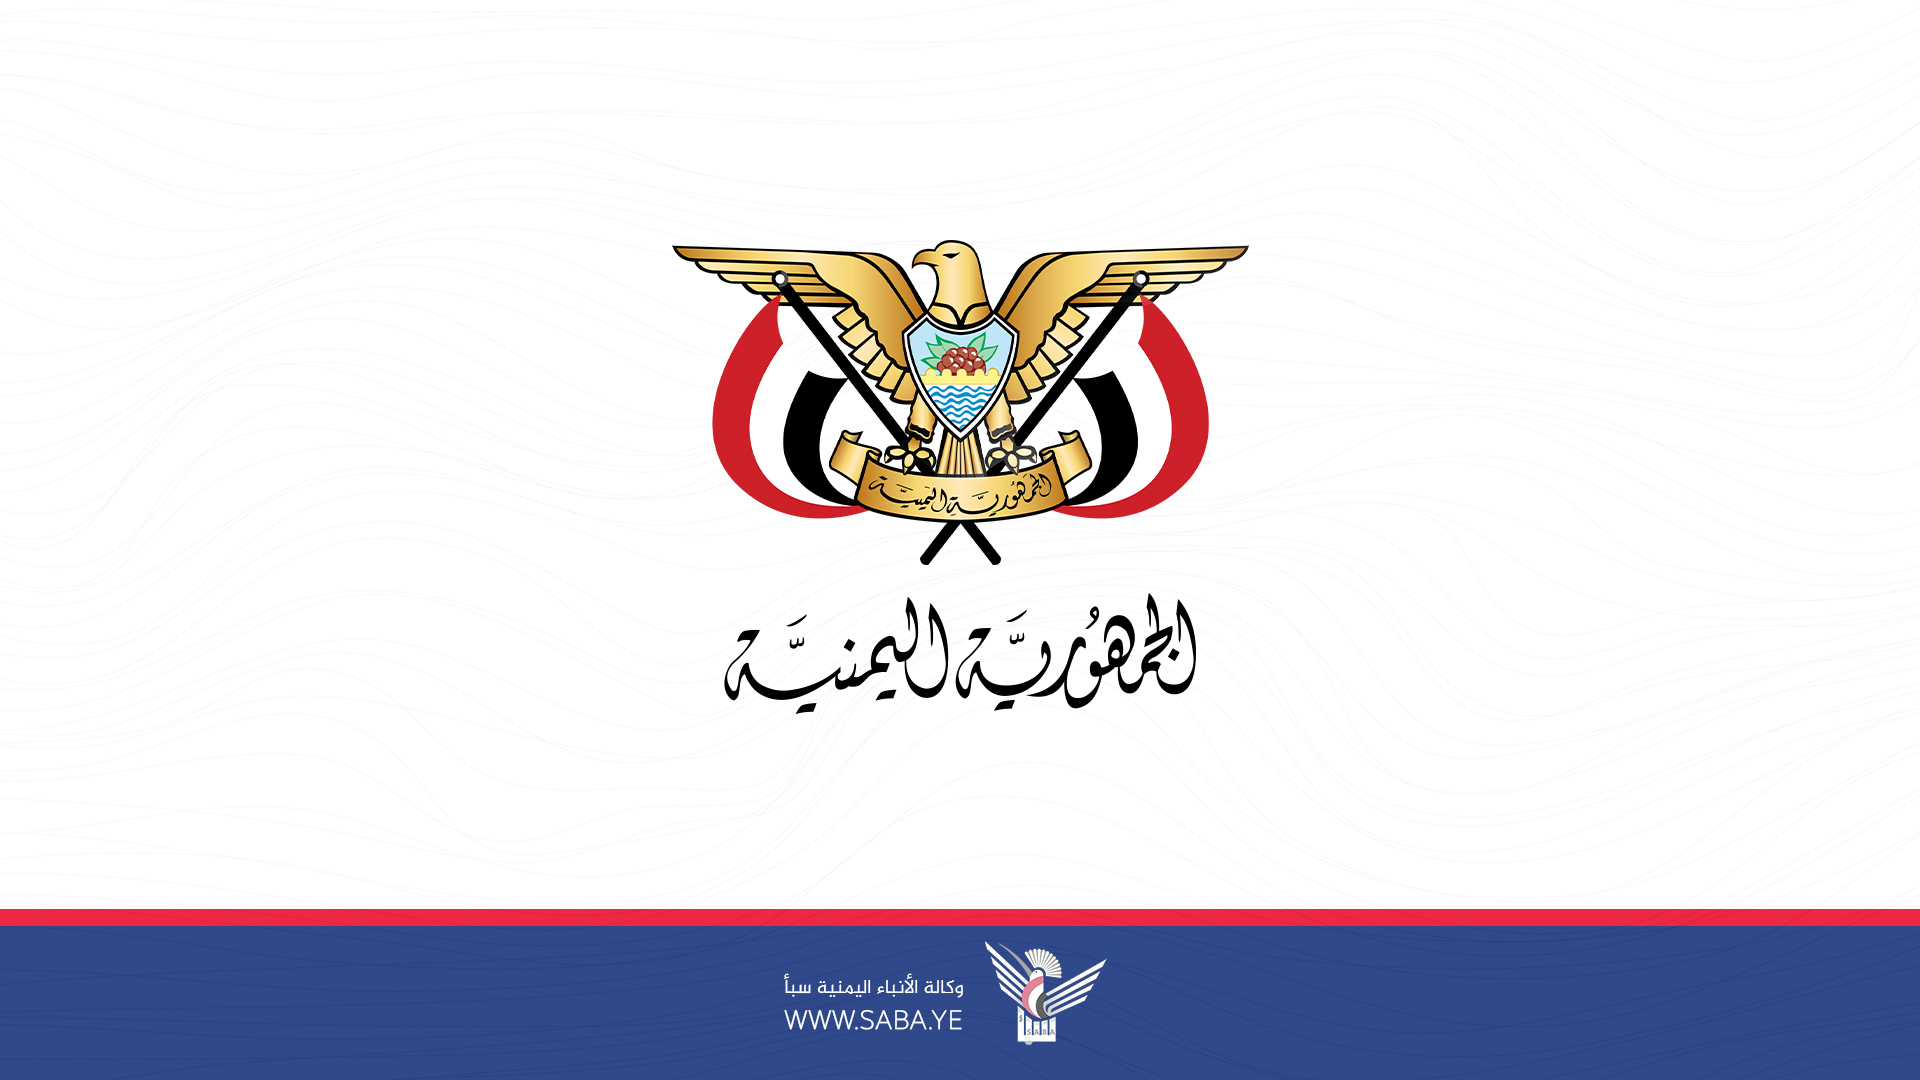 Presidential decree issued to appoint member of Shura Council